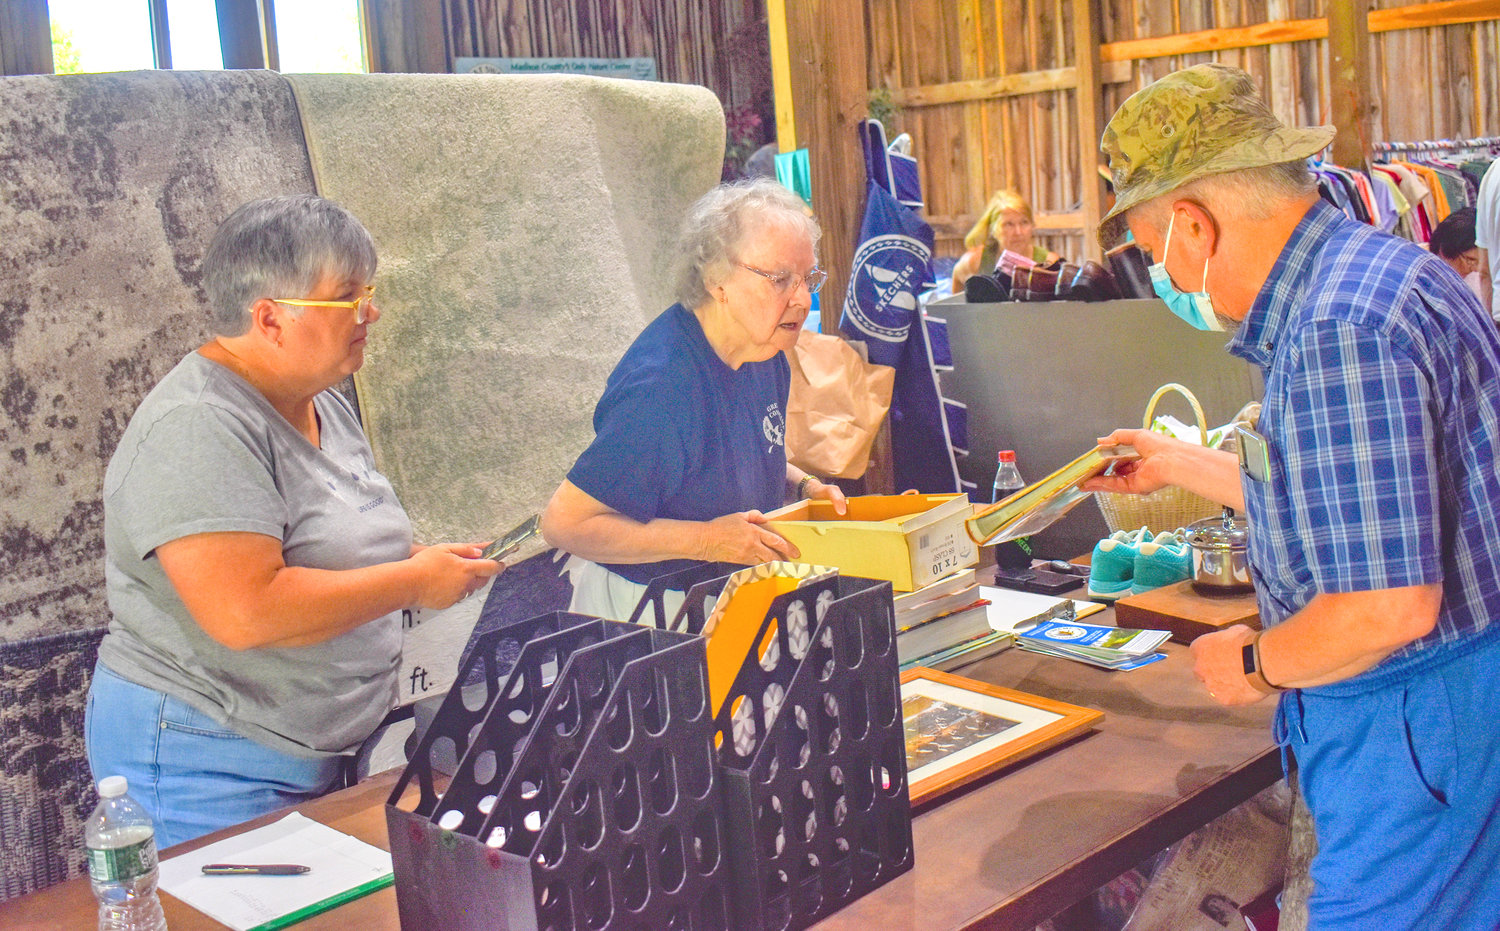 Volunteers facilitate check-out at the Great Swamp Conservancy garage sale.